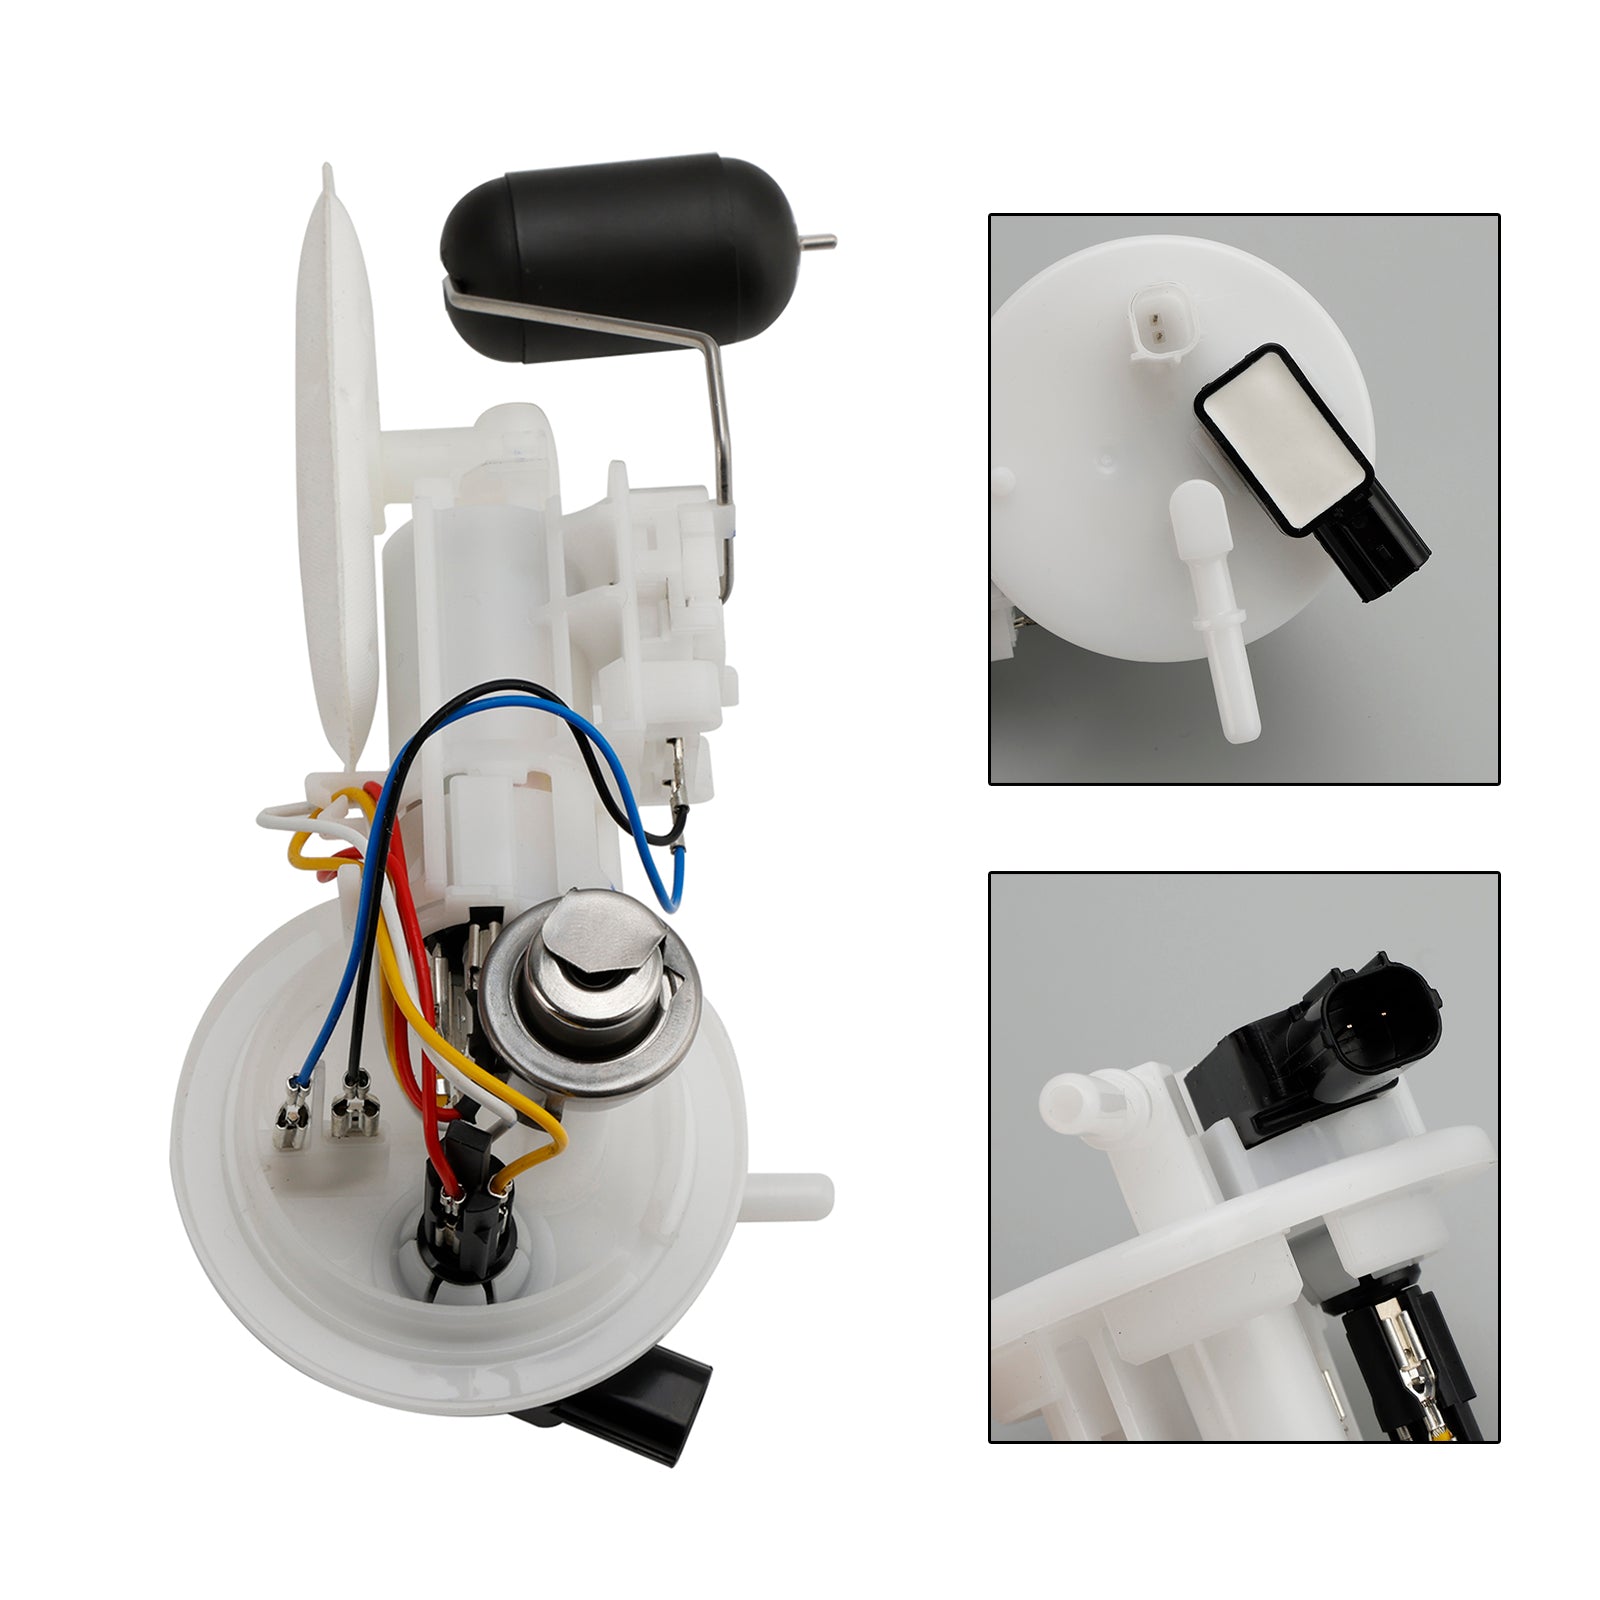 Fuel Pump 2Ph-E3907-00 Replace Fits For Yamaha Mio125 M3 125 Fino 125 Gt125 2015